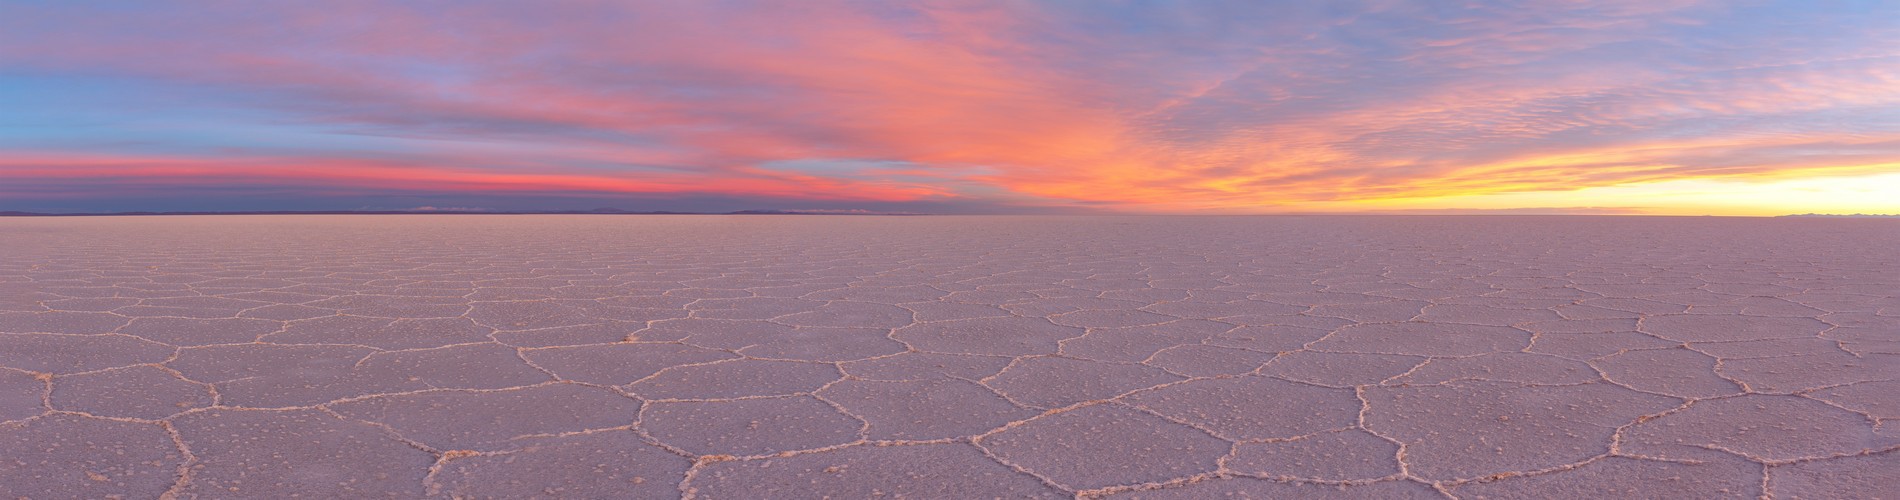 A GUIDE TO THE SALT FLATS OF UYUNI